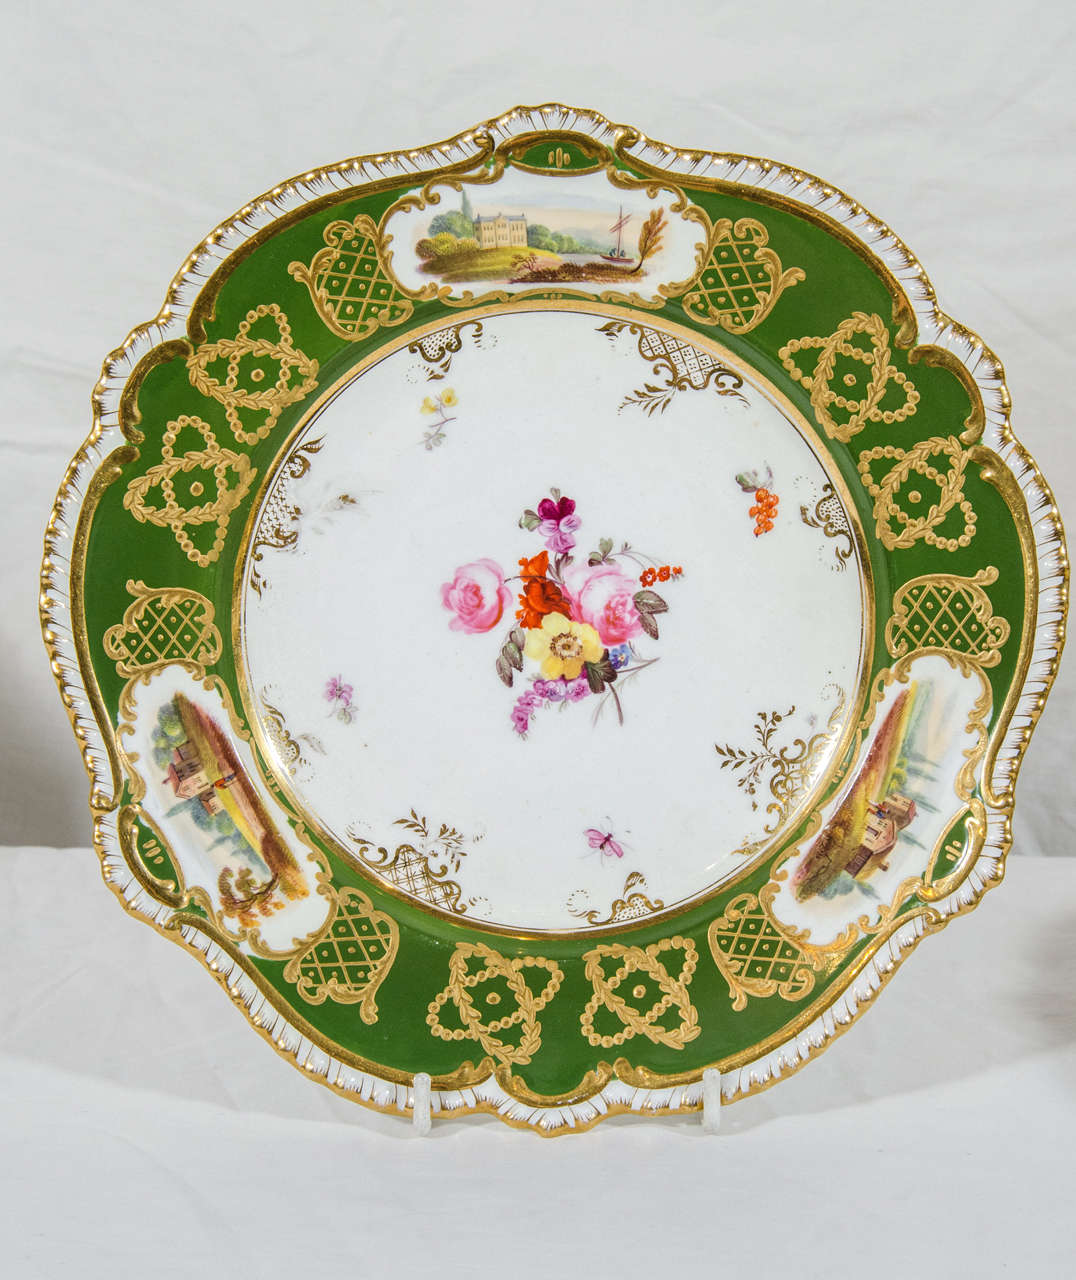 The center of each dish is hand-painted with an individual bouquet of flowers.
The wide forest green border is decorated with gilt and painted landscape scenes, all framed by a gadrooned and gilded edge.